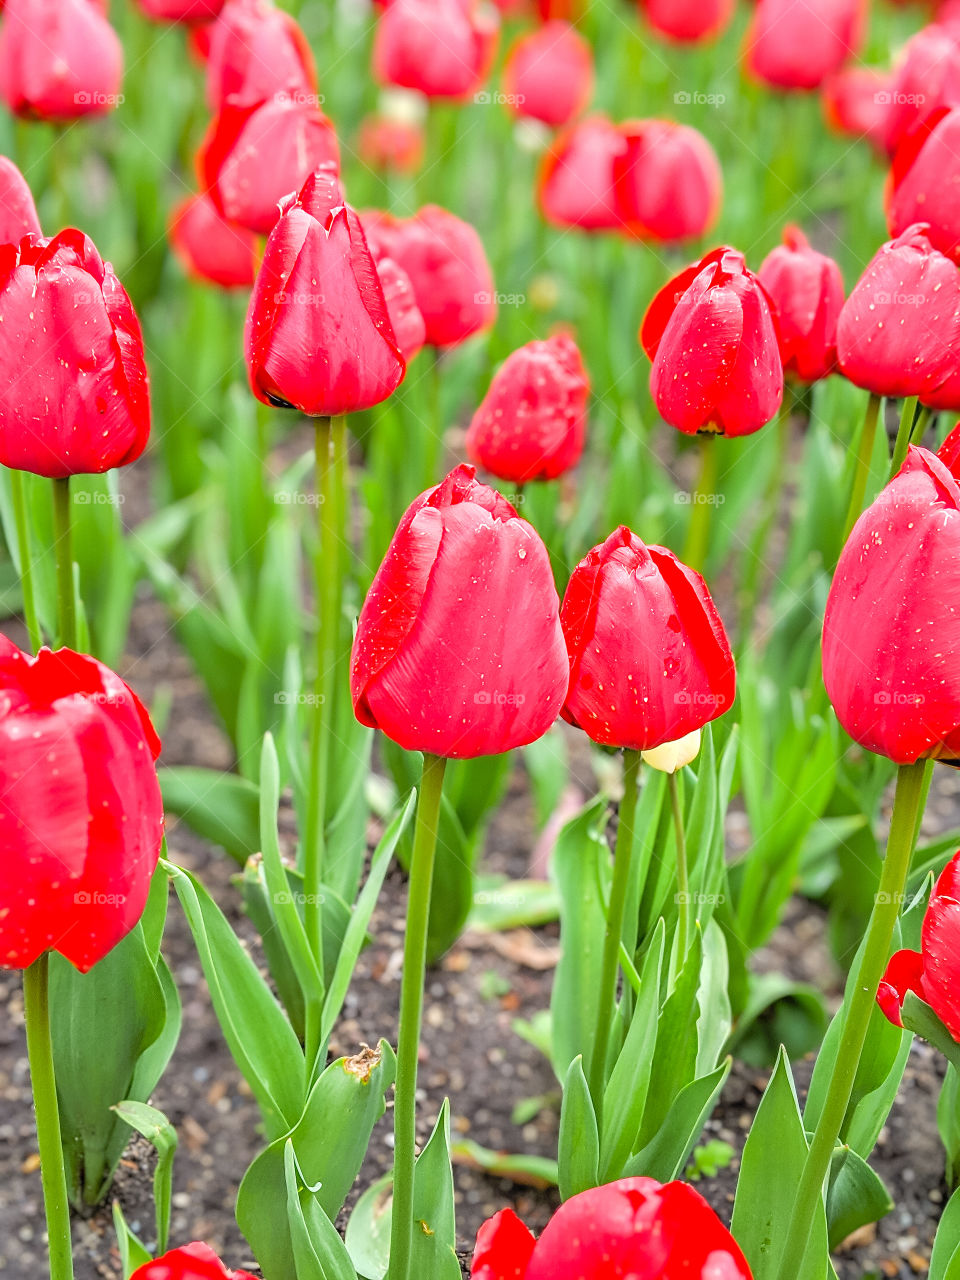 Vibrant, Bright, and Colorful Red Tulips Budding in Spring